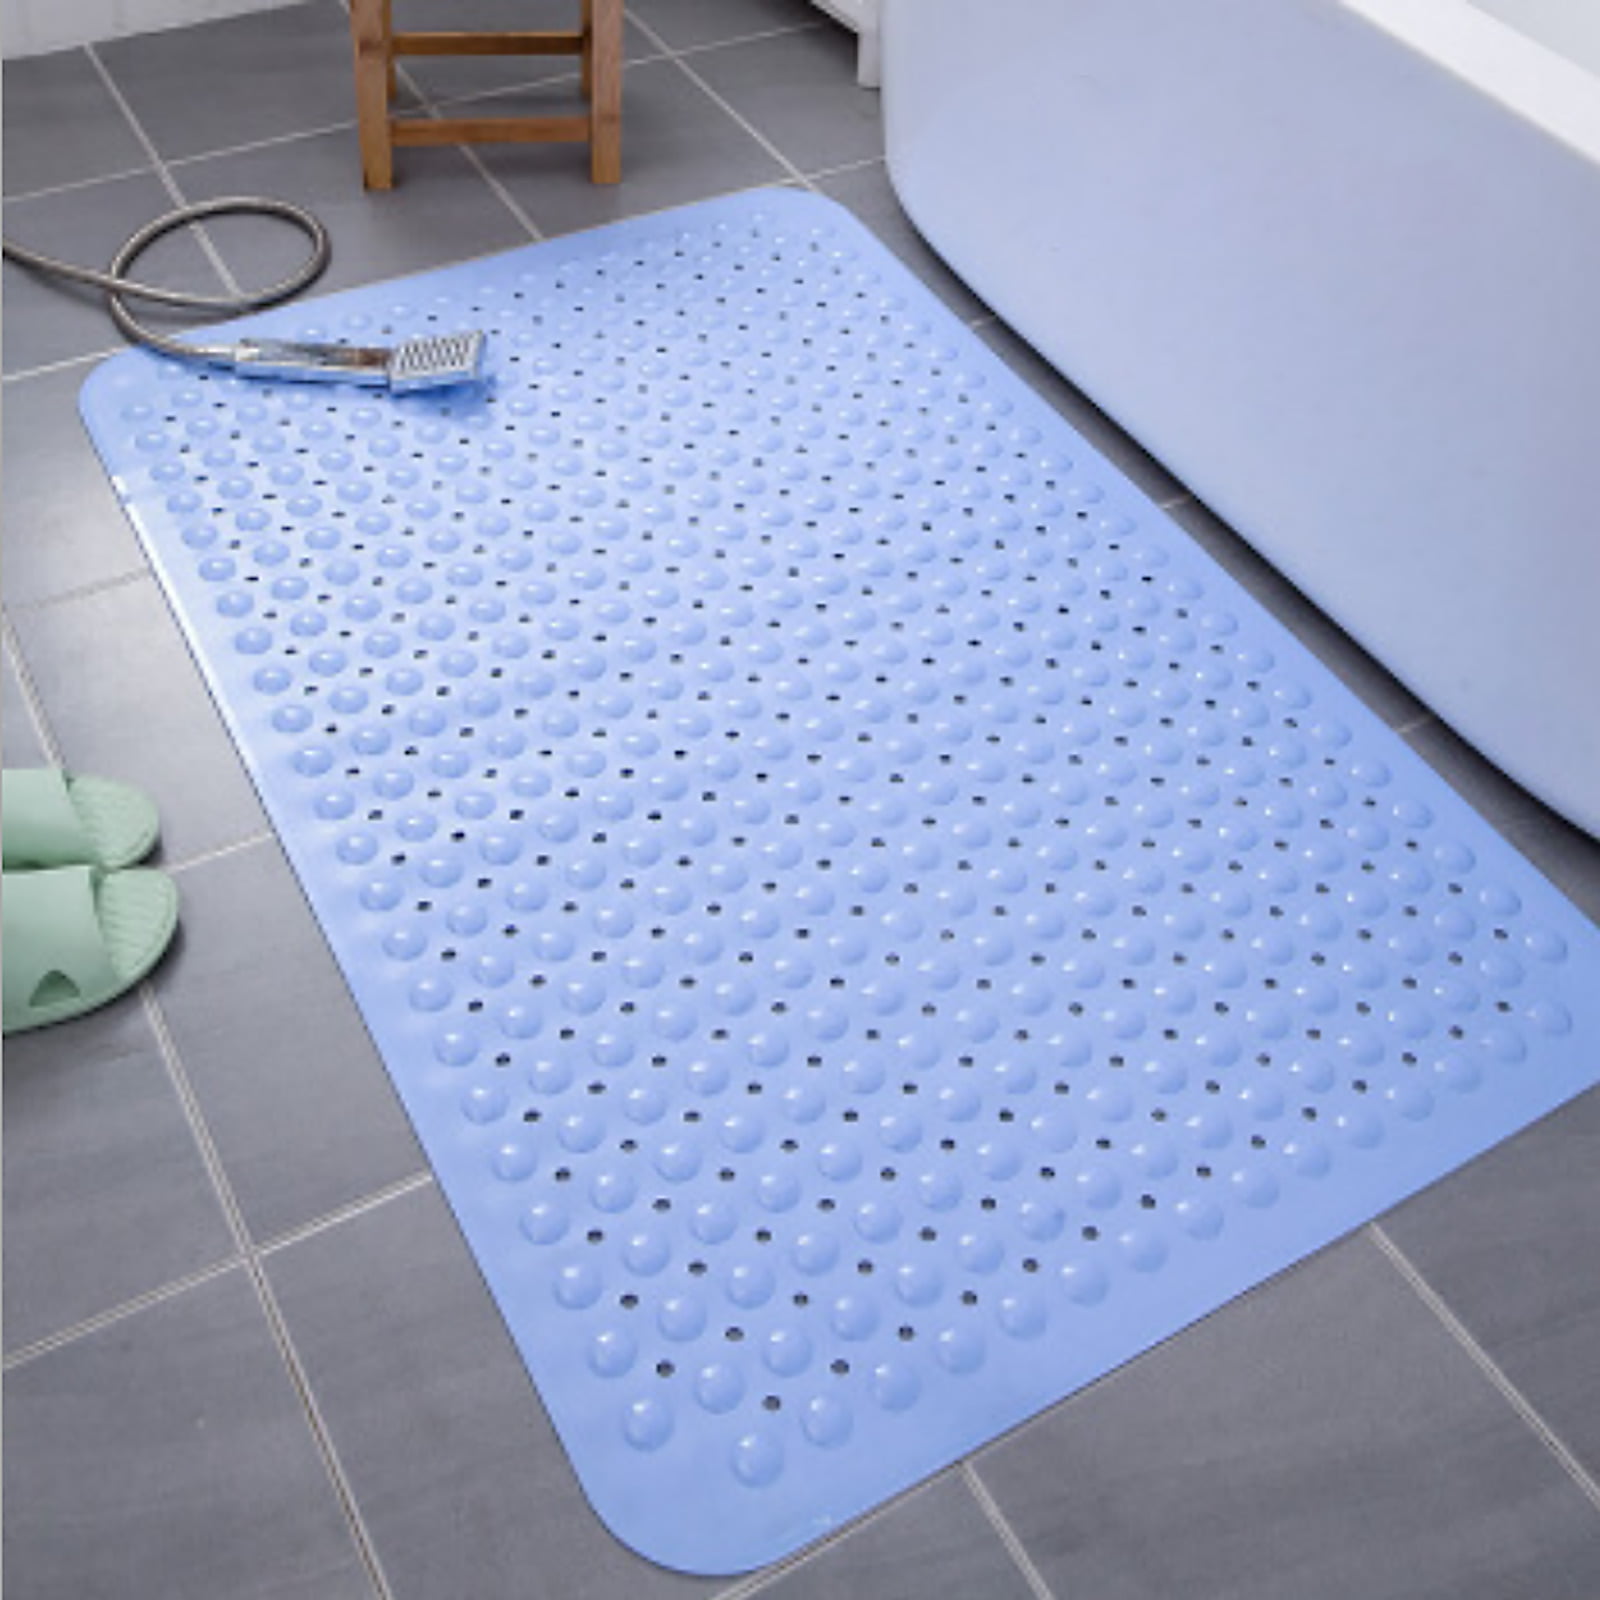 SoftStep Microfiber Bath Mat Non Slip, Waterproof, Anti Mold Ideal For  Bathroom And Shower Floors From Dou08, $6.24